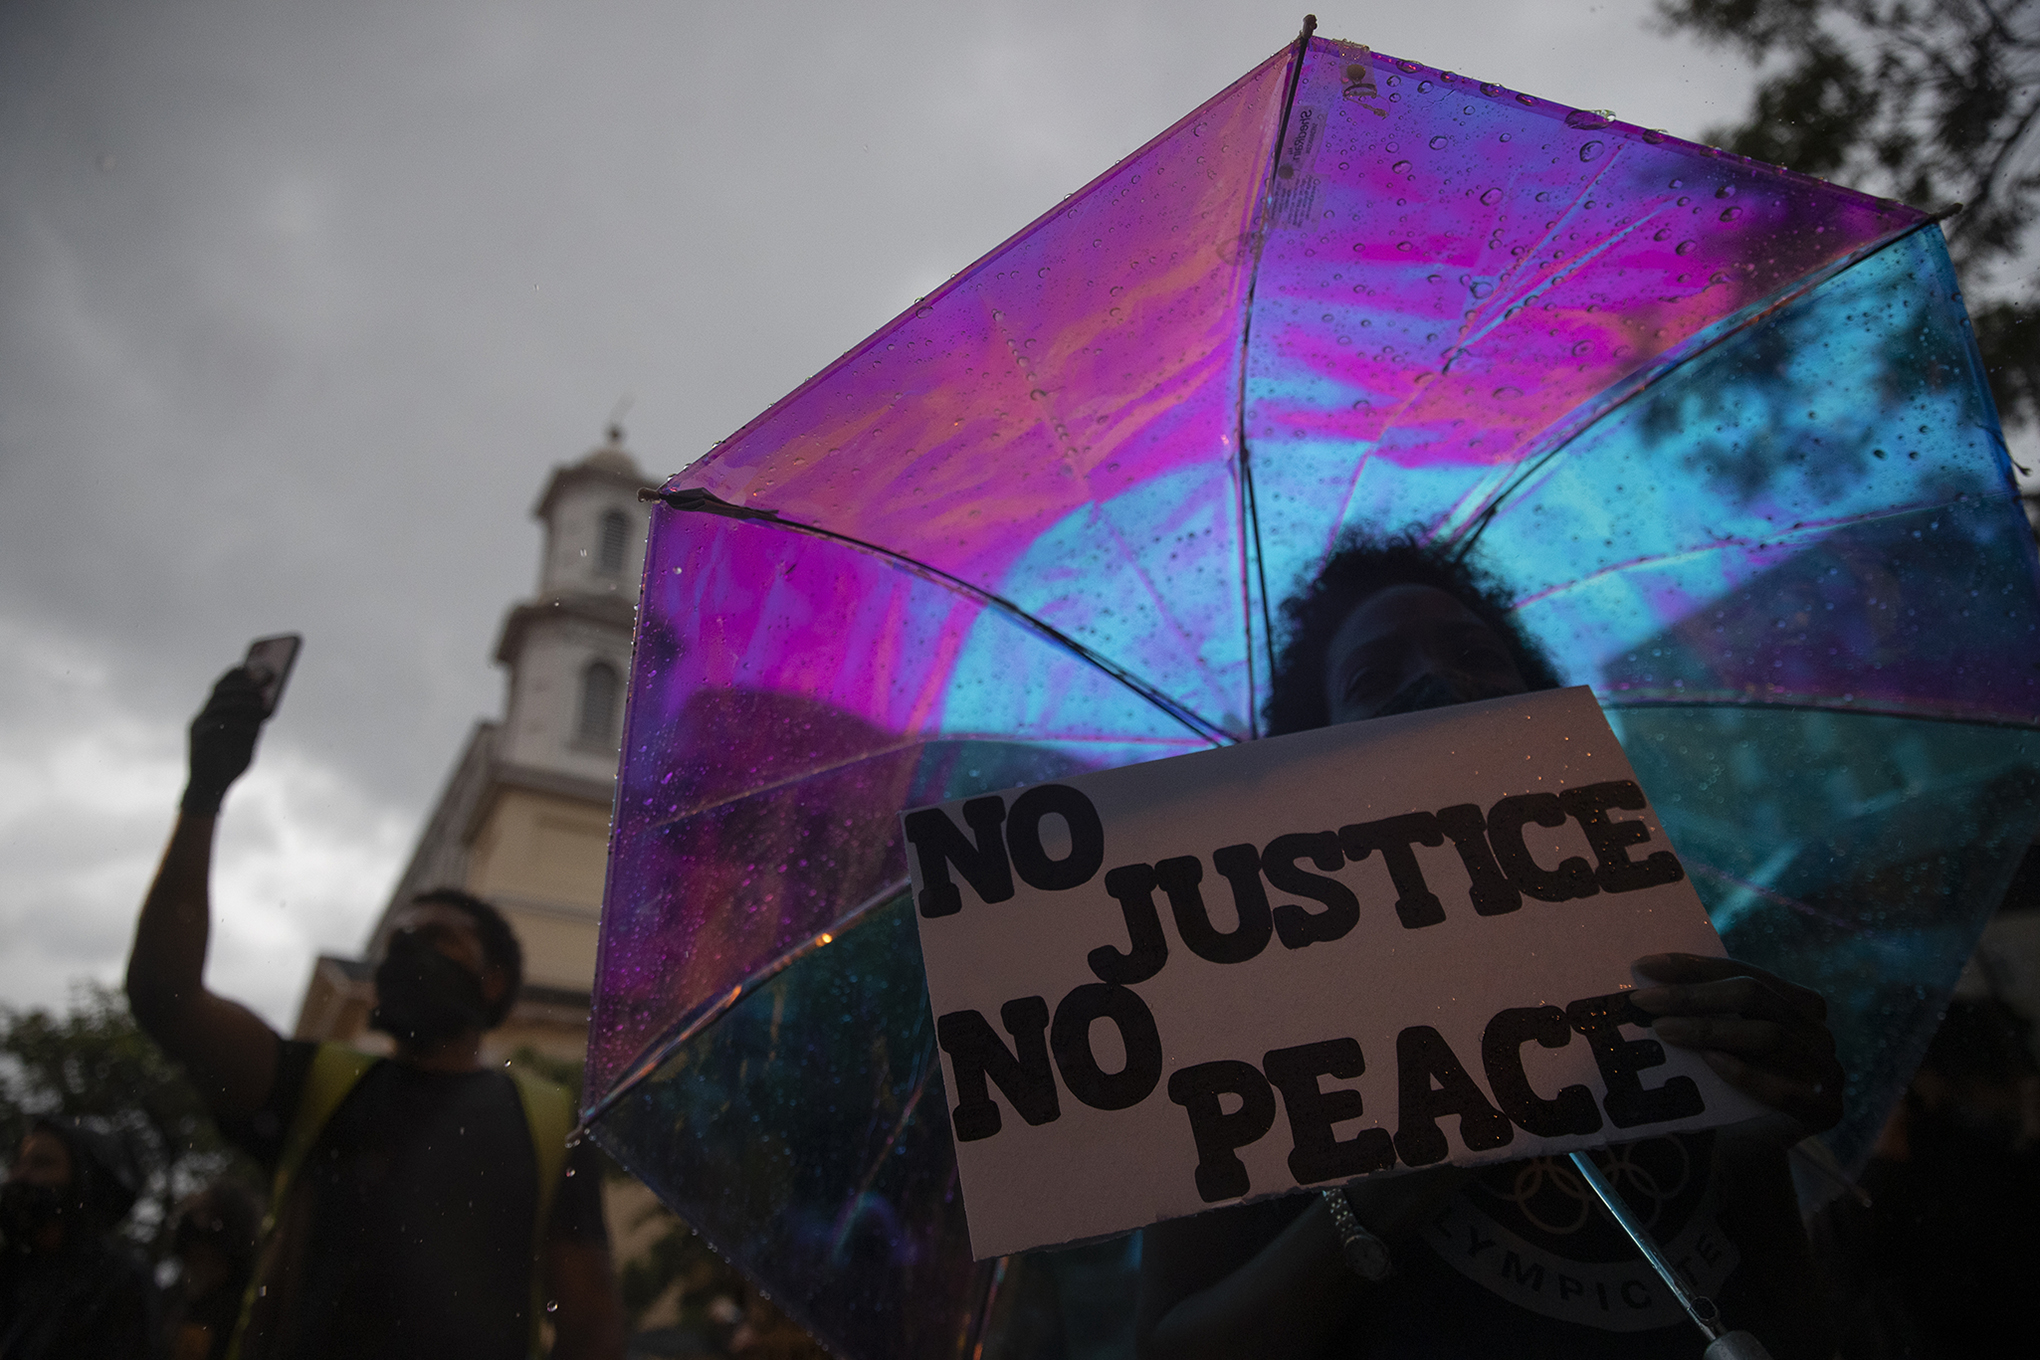 A woman holds a sign that reads "No Justice No Peace" under an umbrella i